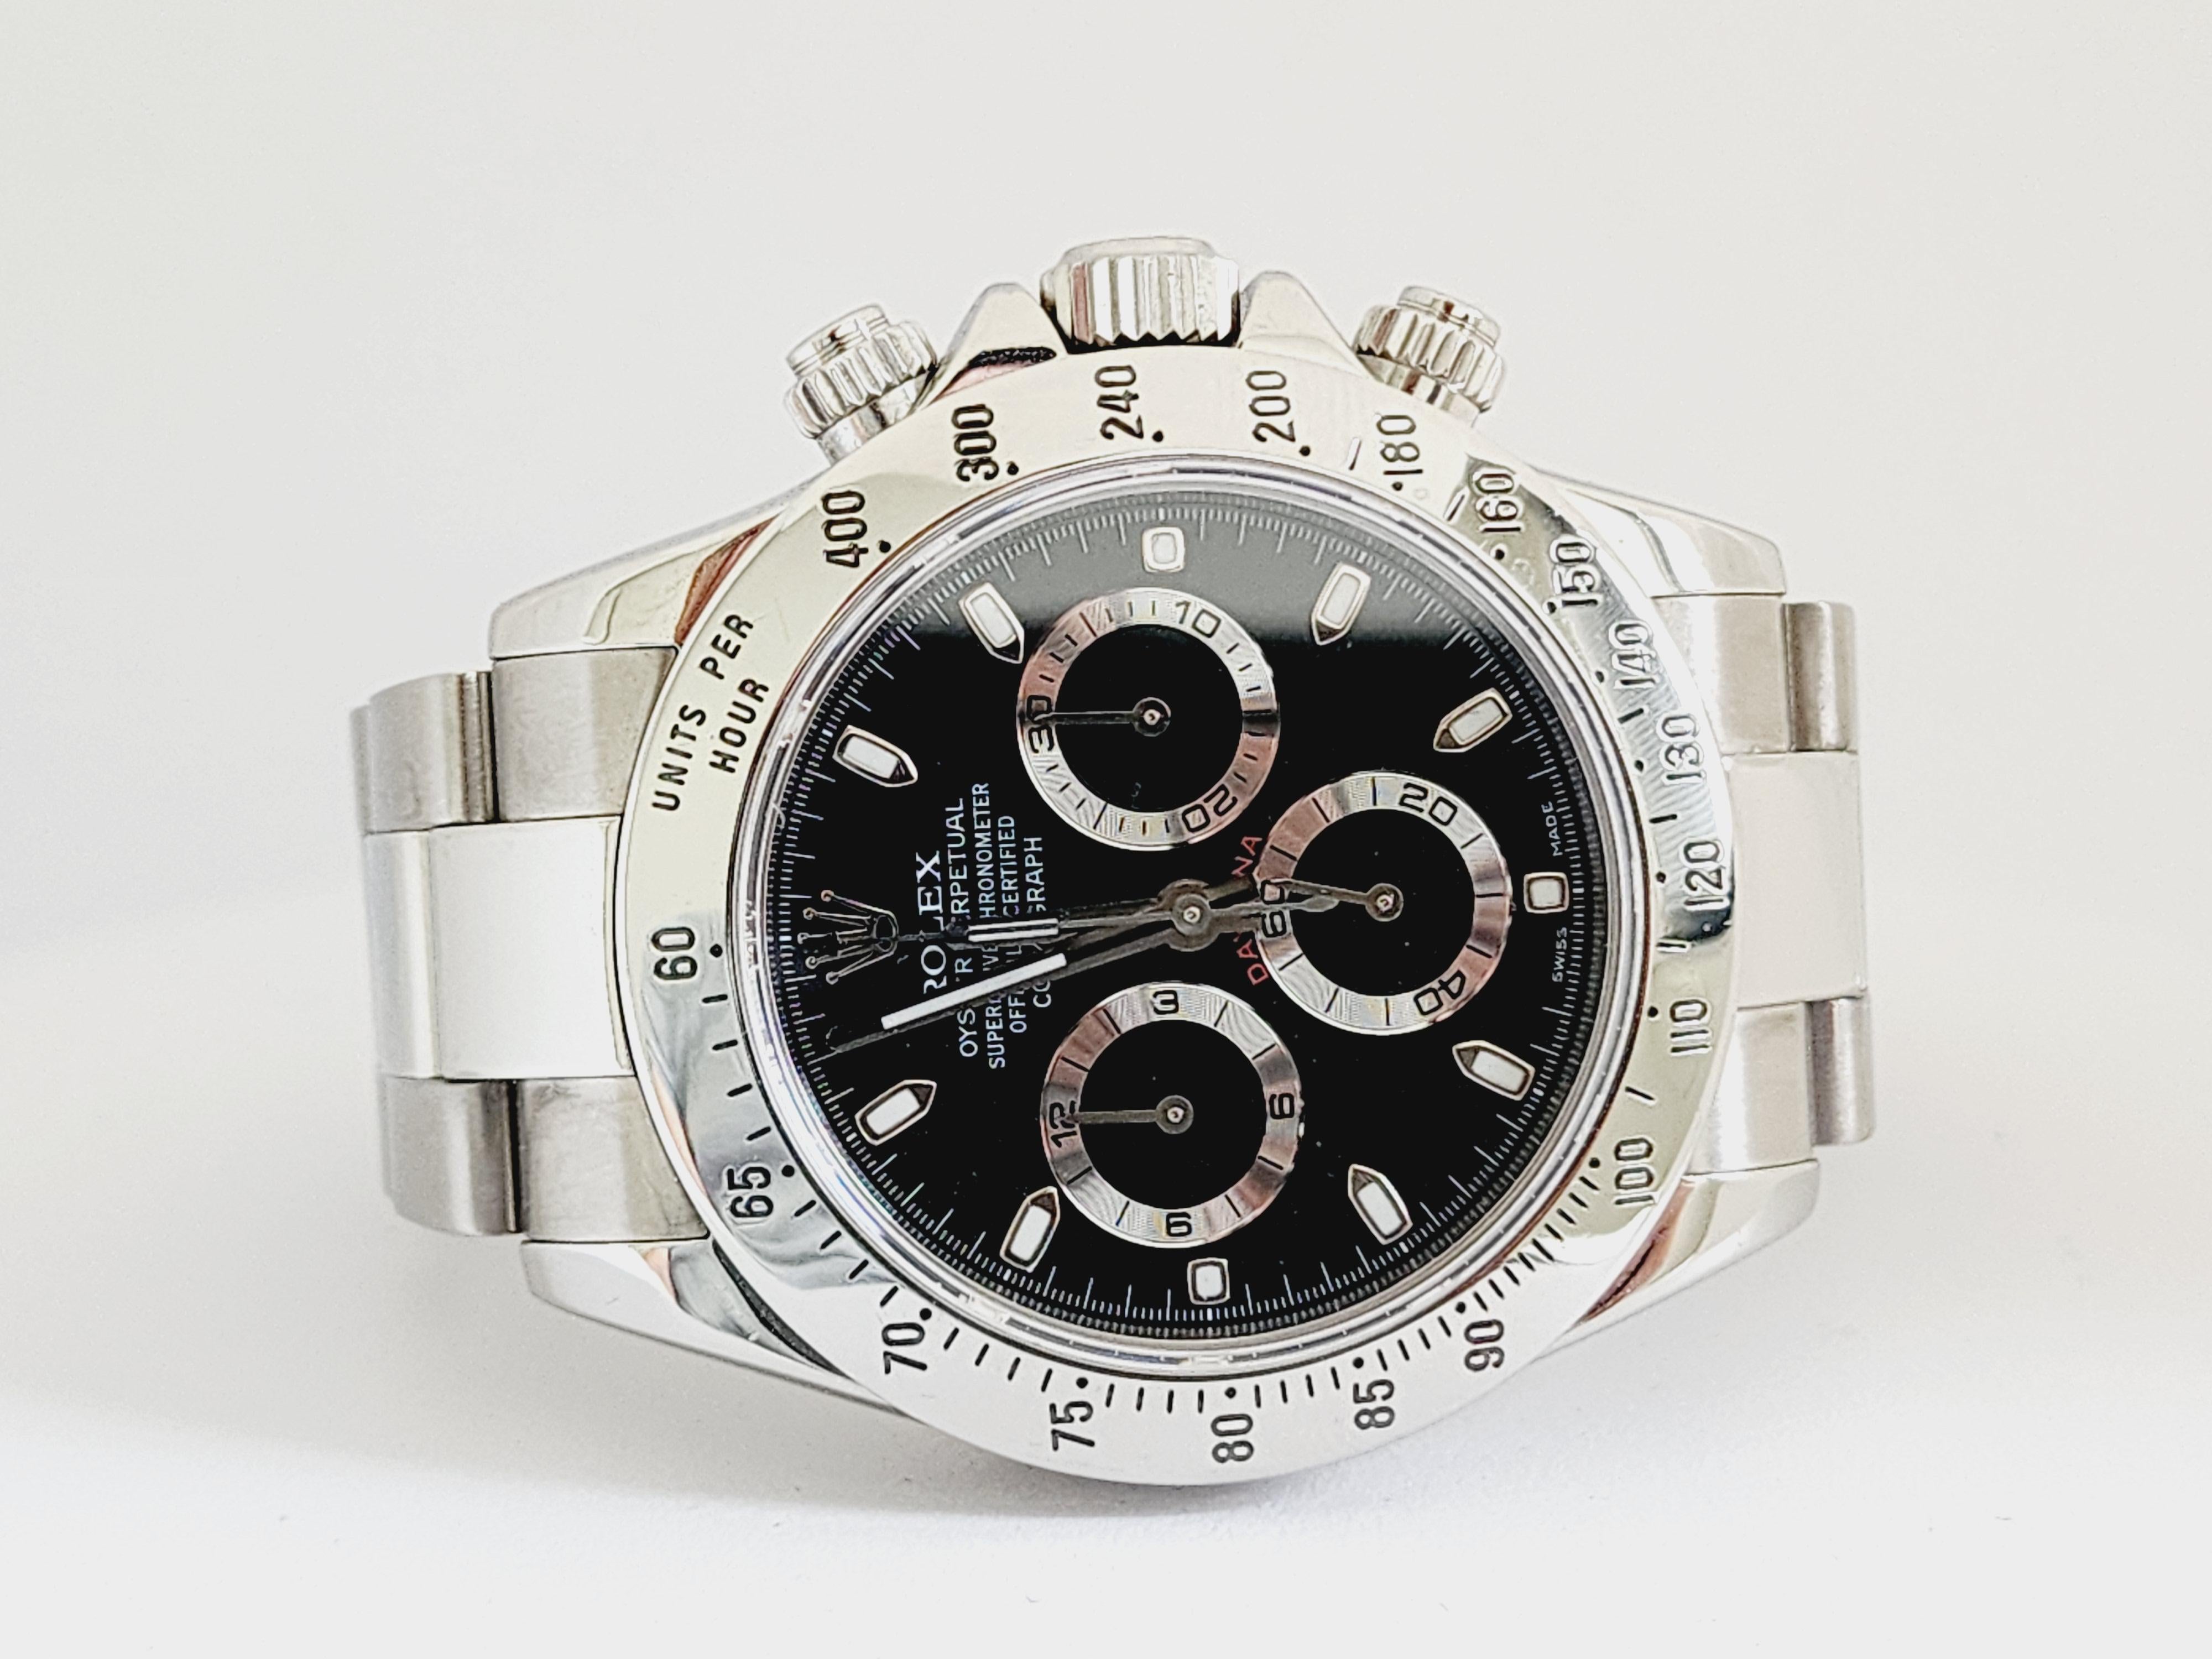 Released in 1963, the Rolex Daytona was created to meet the demands of racing drivers, thanks to a feature that tracks elapsed time and another to calculate average speed. In excellent condition and recently serviced. All components are factory